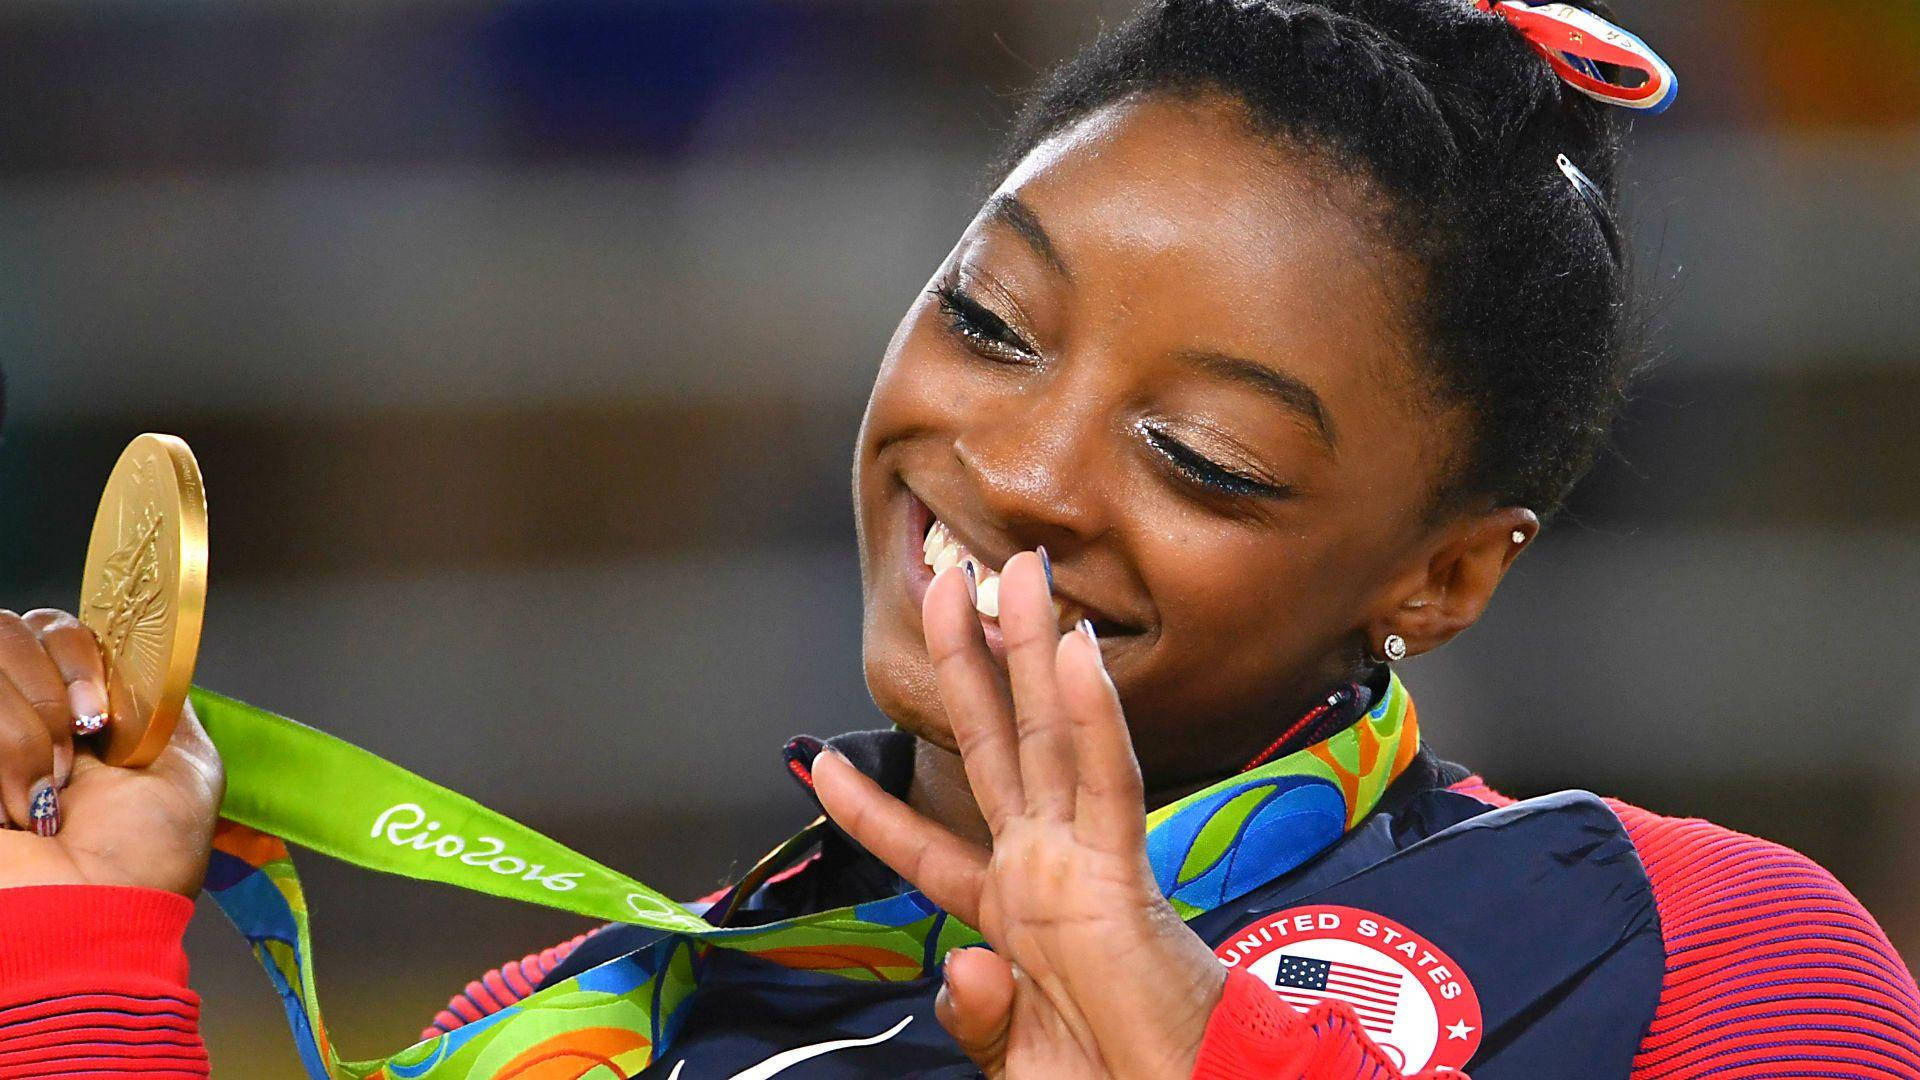 Simone Biles With Gold Medal